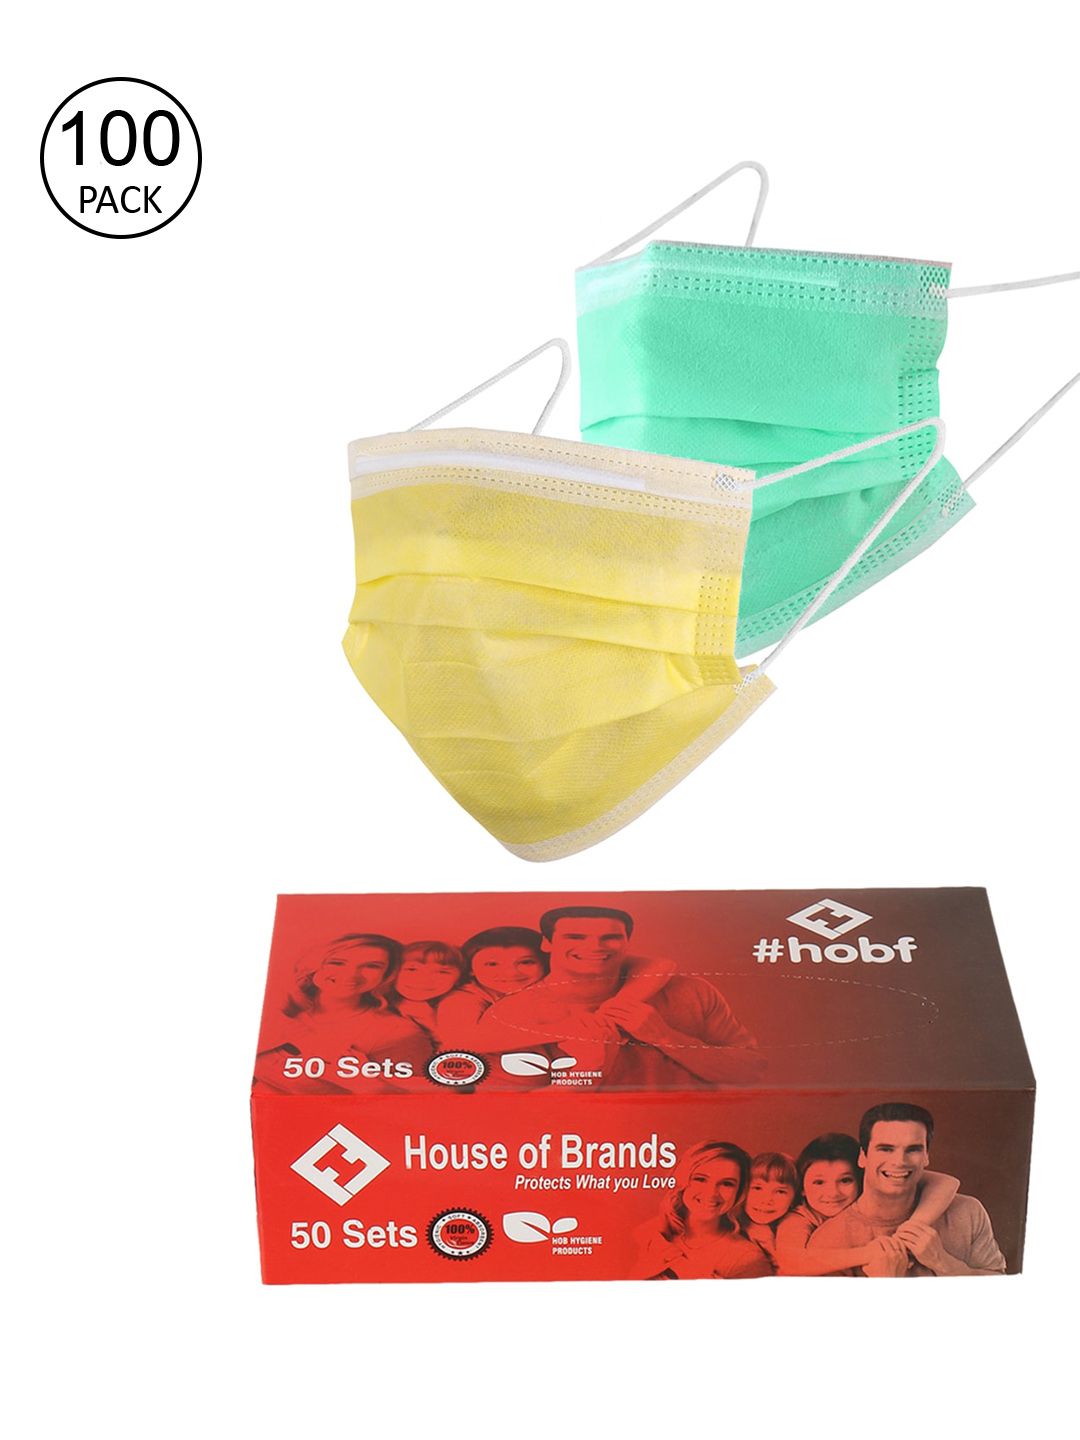 LONDON FASHION hob Pack Of 100 Green & Yellow 3-Ply Anti-Pollution Ultrasonic Surgical Masks with Nose Pin Price in India